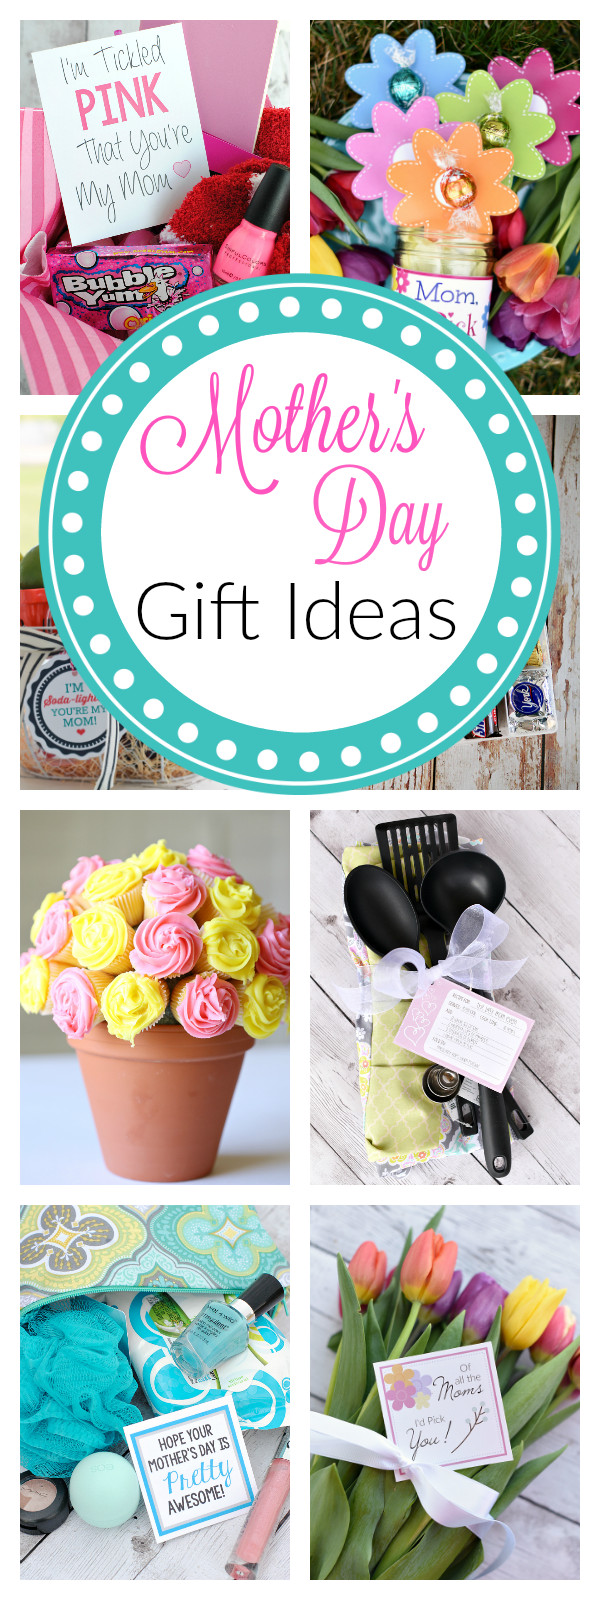 Mothers Day Gift Ideads
 25 Cute Mother s Day Gifts – Fun Squared